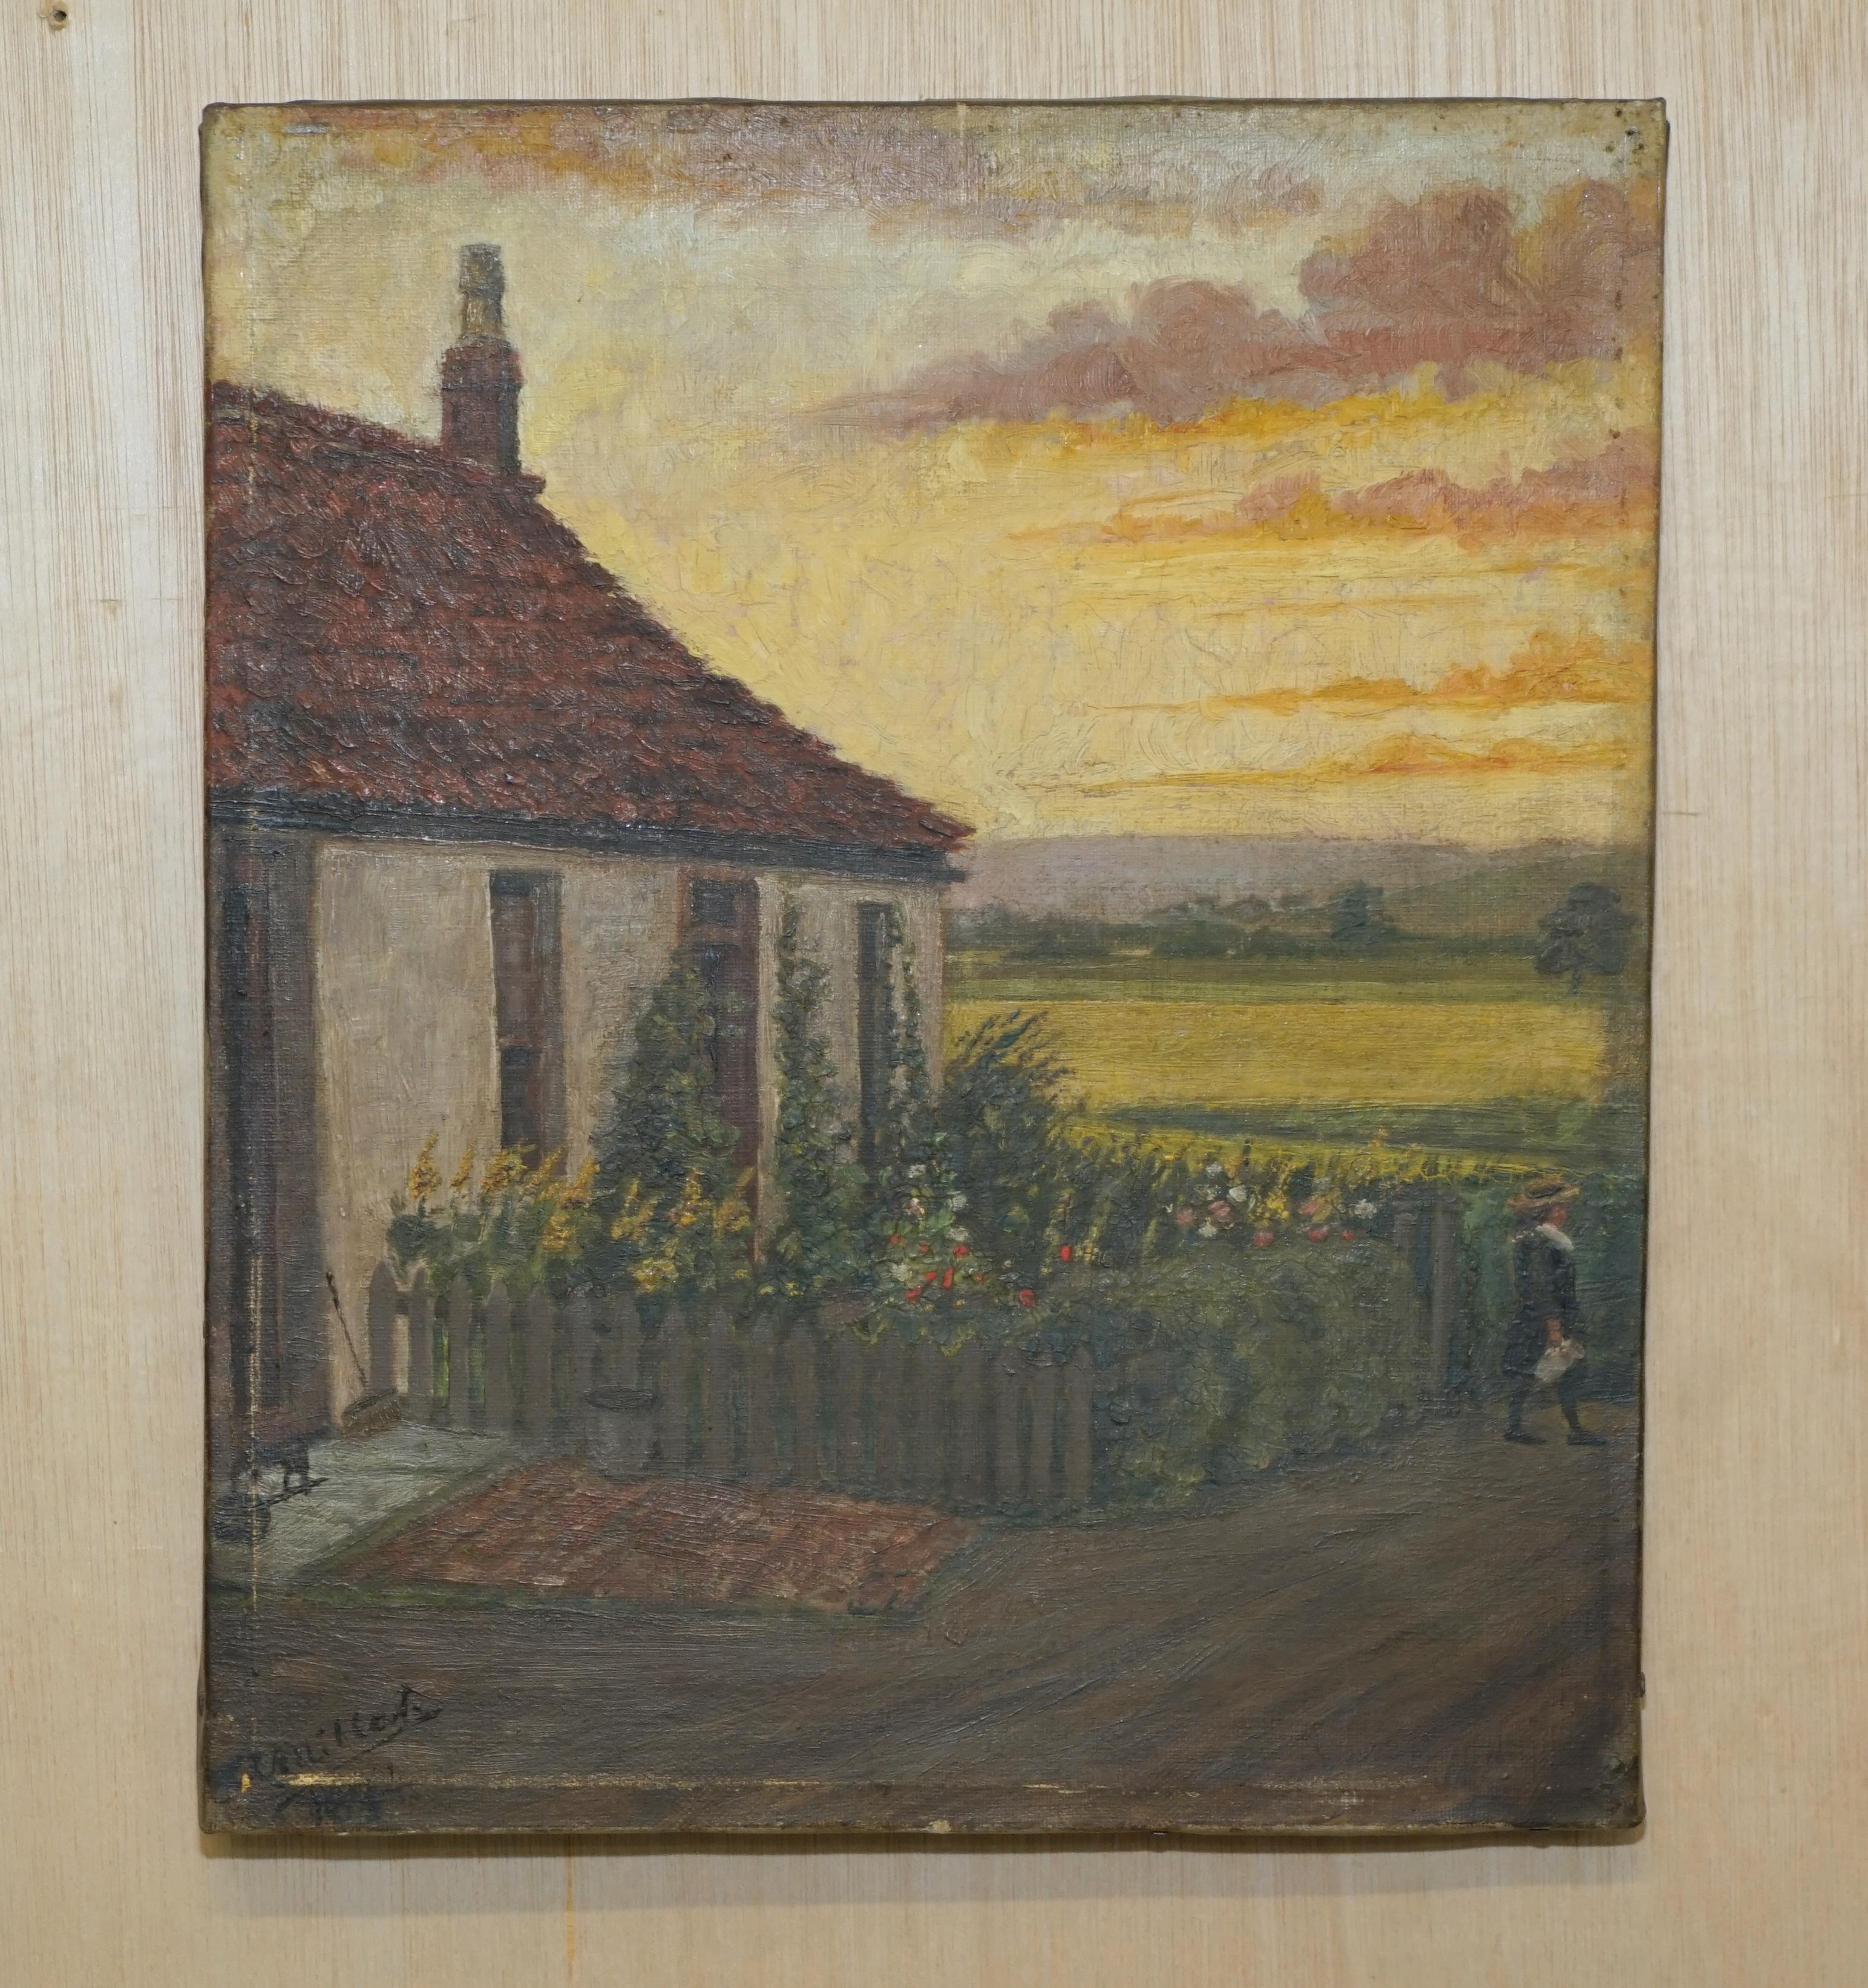 EXQUISITE 1894 SiGNED & DATED OIL ON CANVAS IN ORIGINAL FRAME OF FARM COTTAGE 8